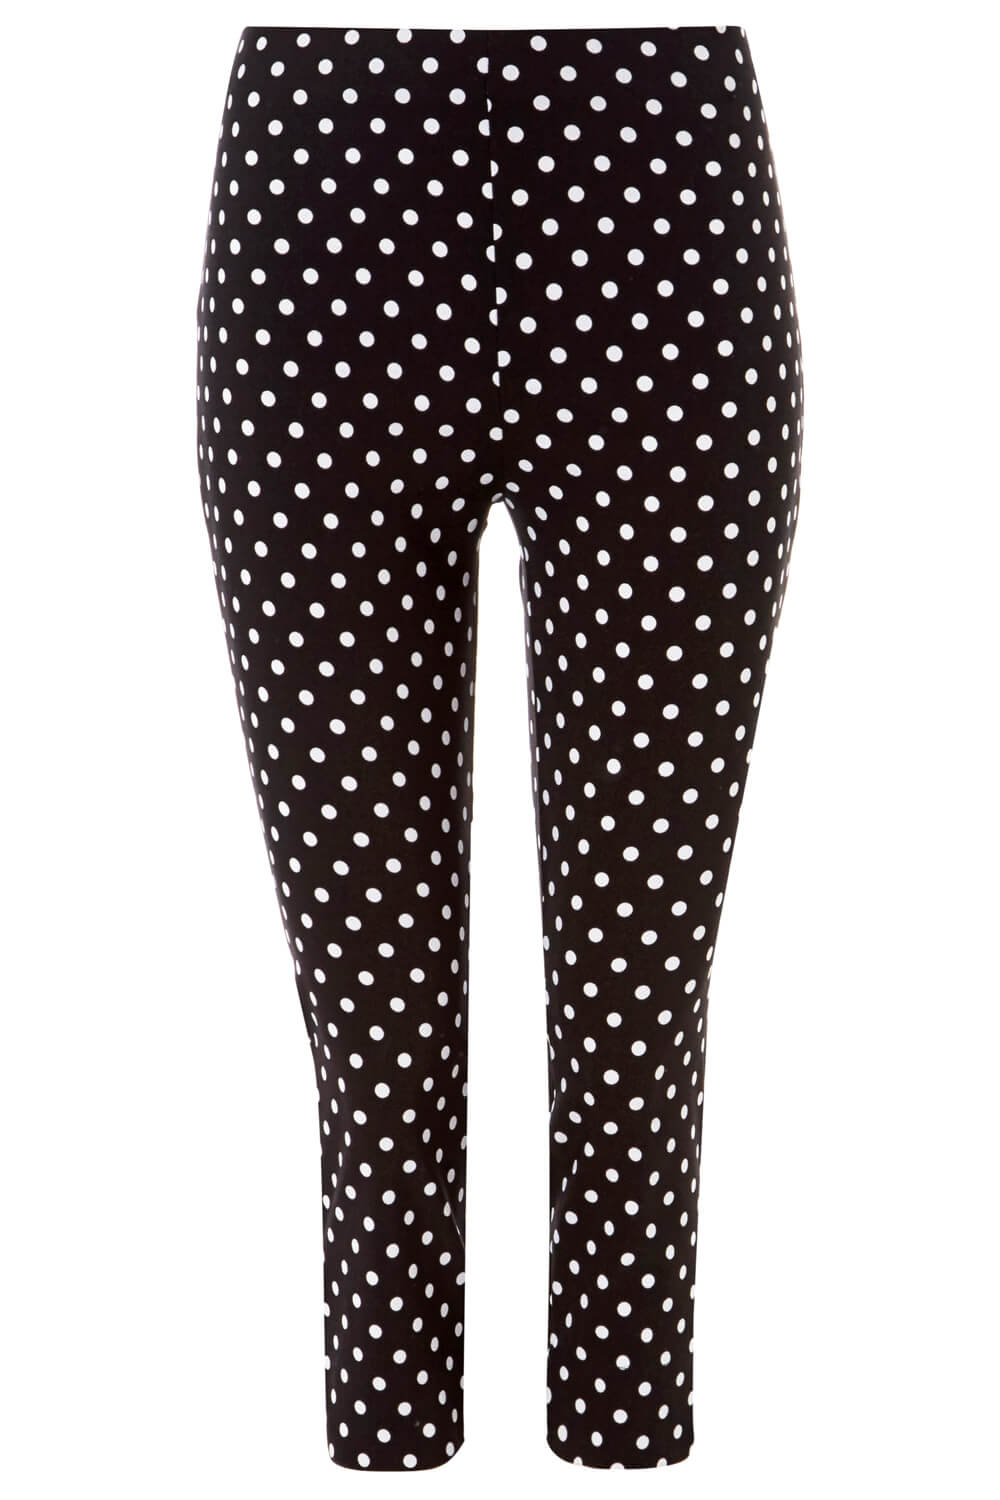 Black Spot Cropped Stretch Trousers, Image 5 of 5